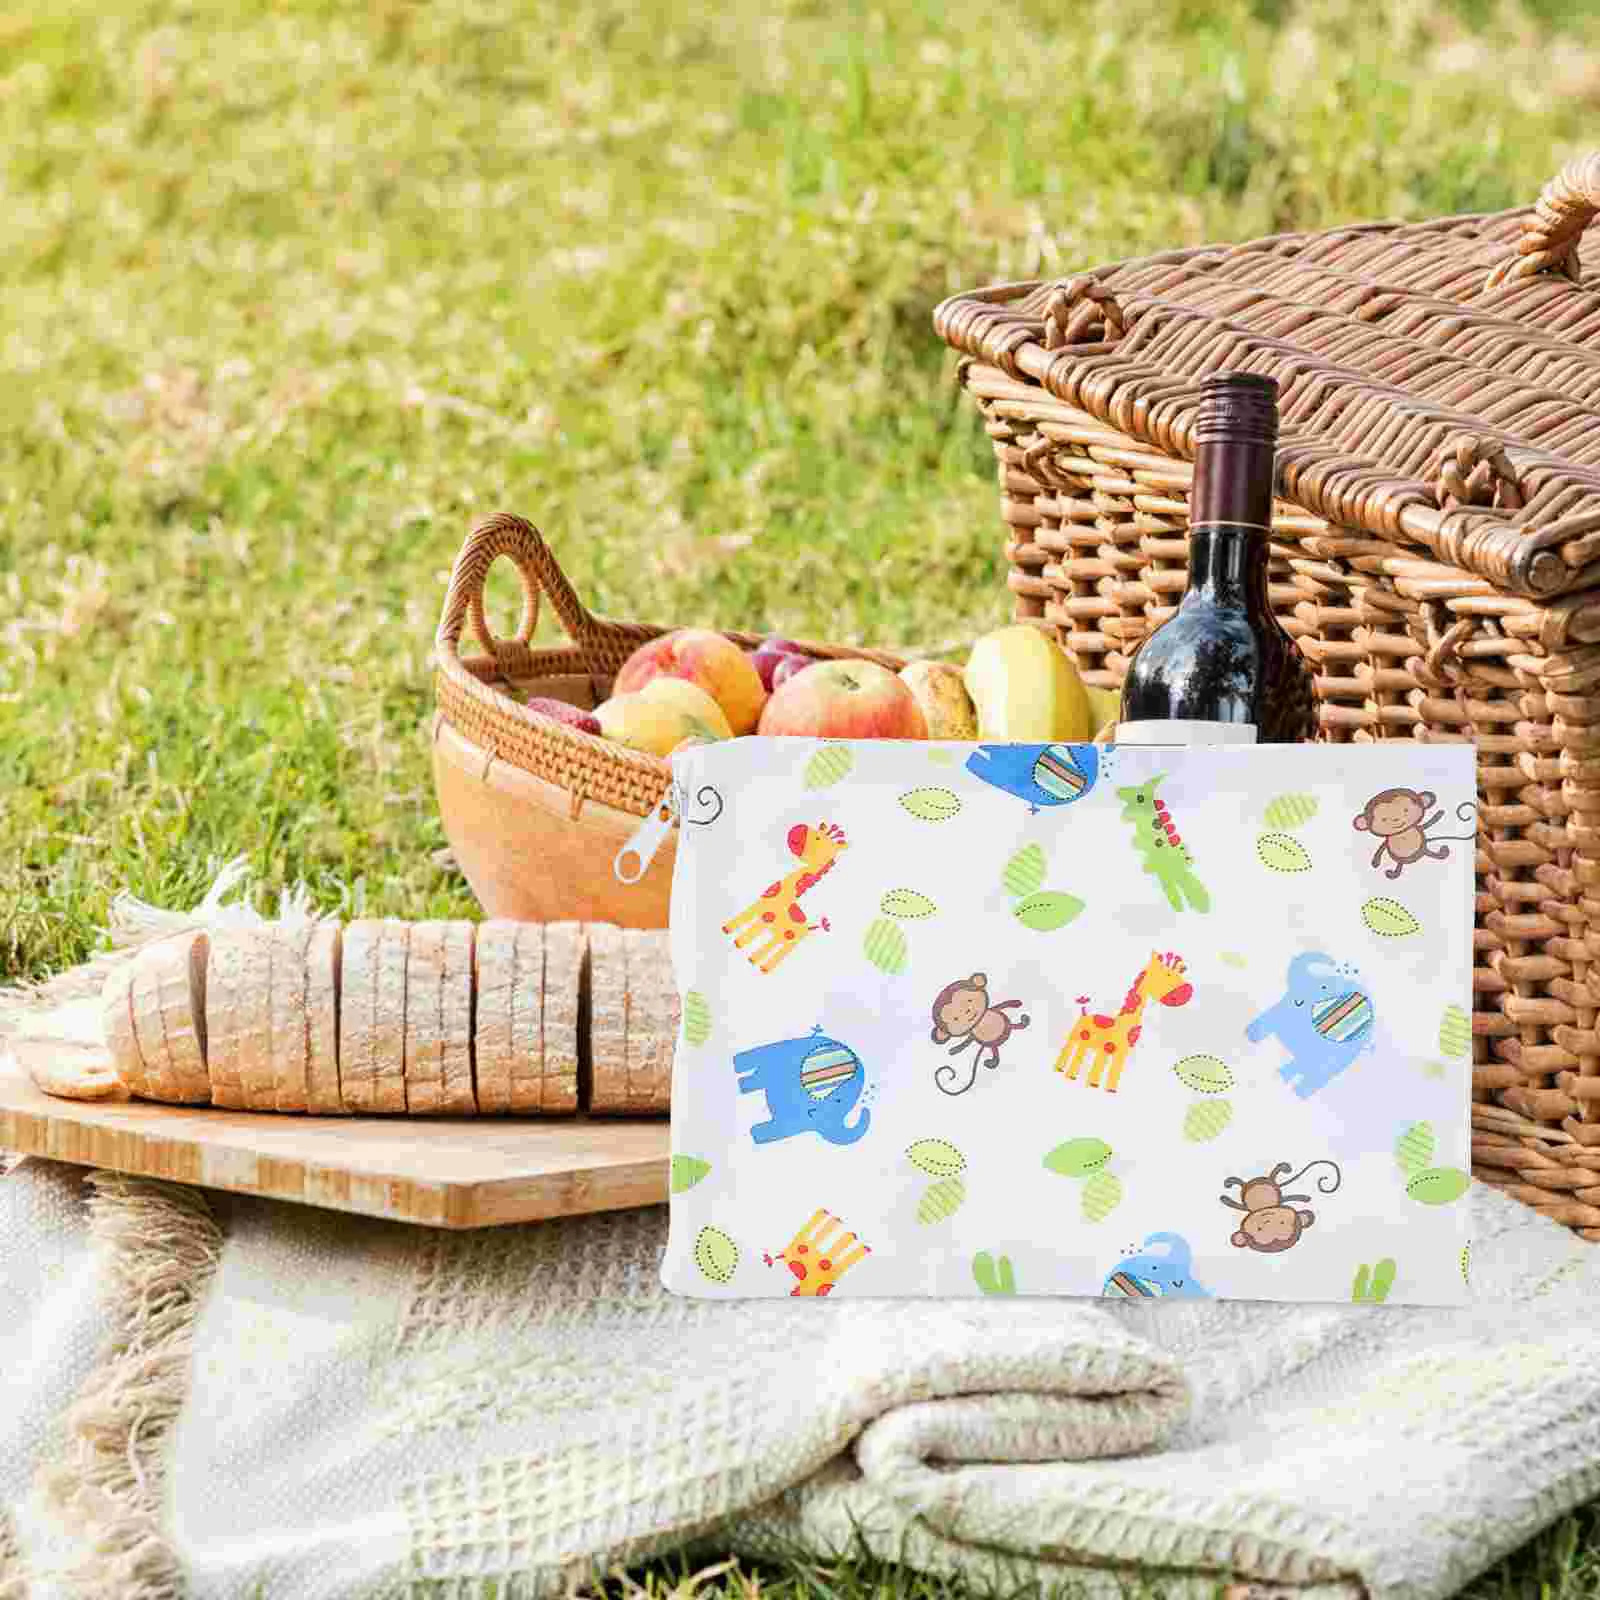 

3 Pcs Kids Lunch Bag Cookies Accessory Household Multi-function Snack Bread Reusable Biscuit Accessories Bags Sandwich Child